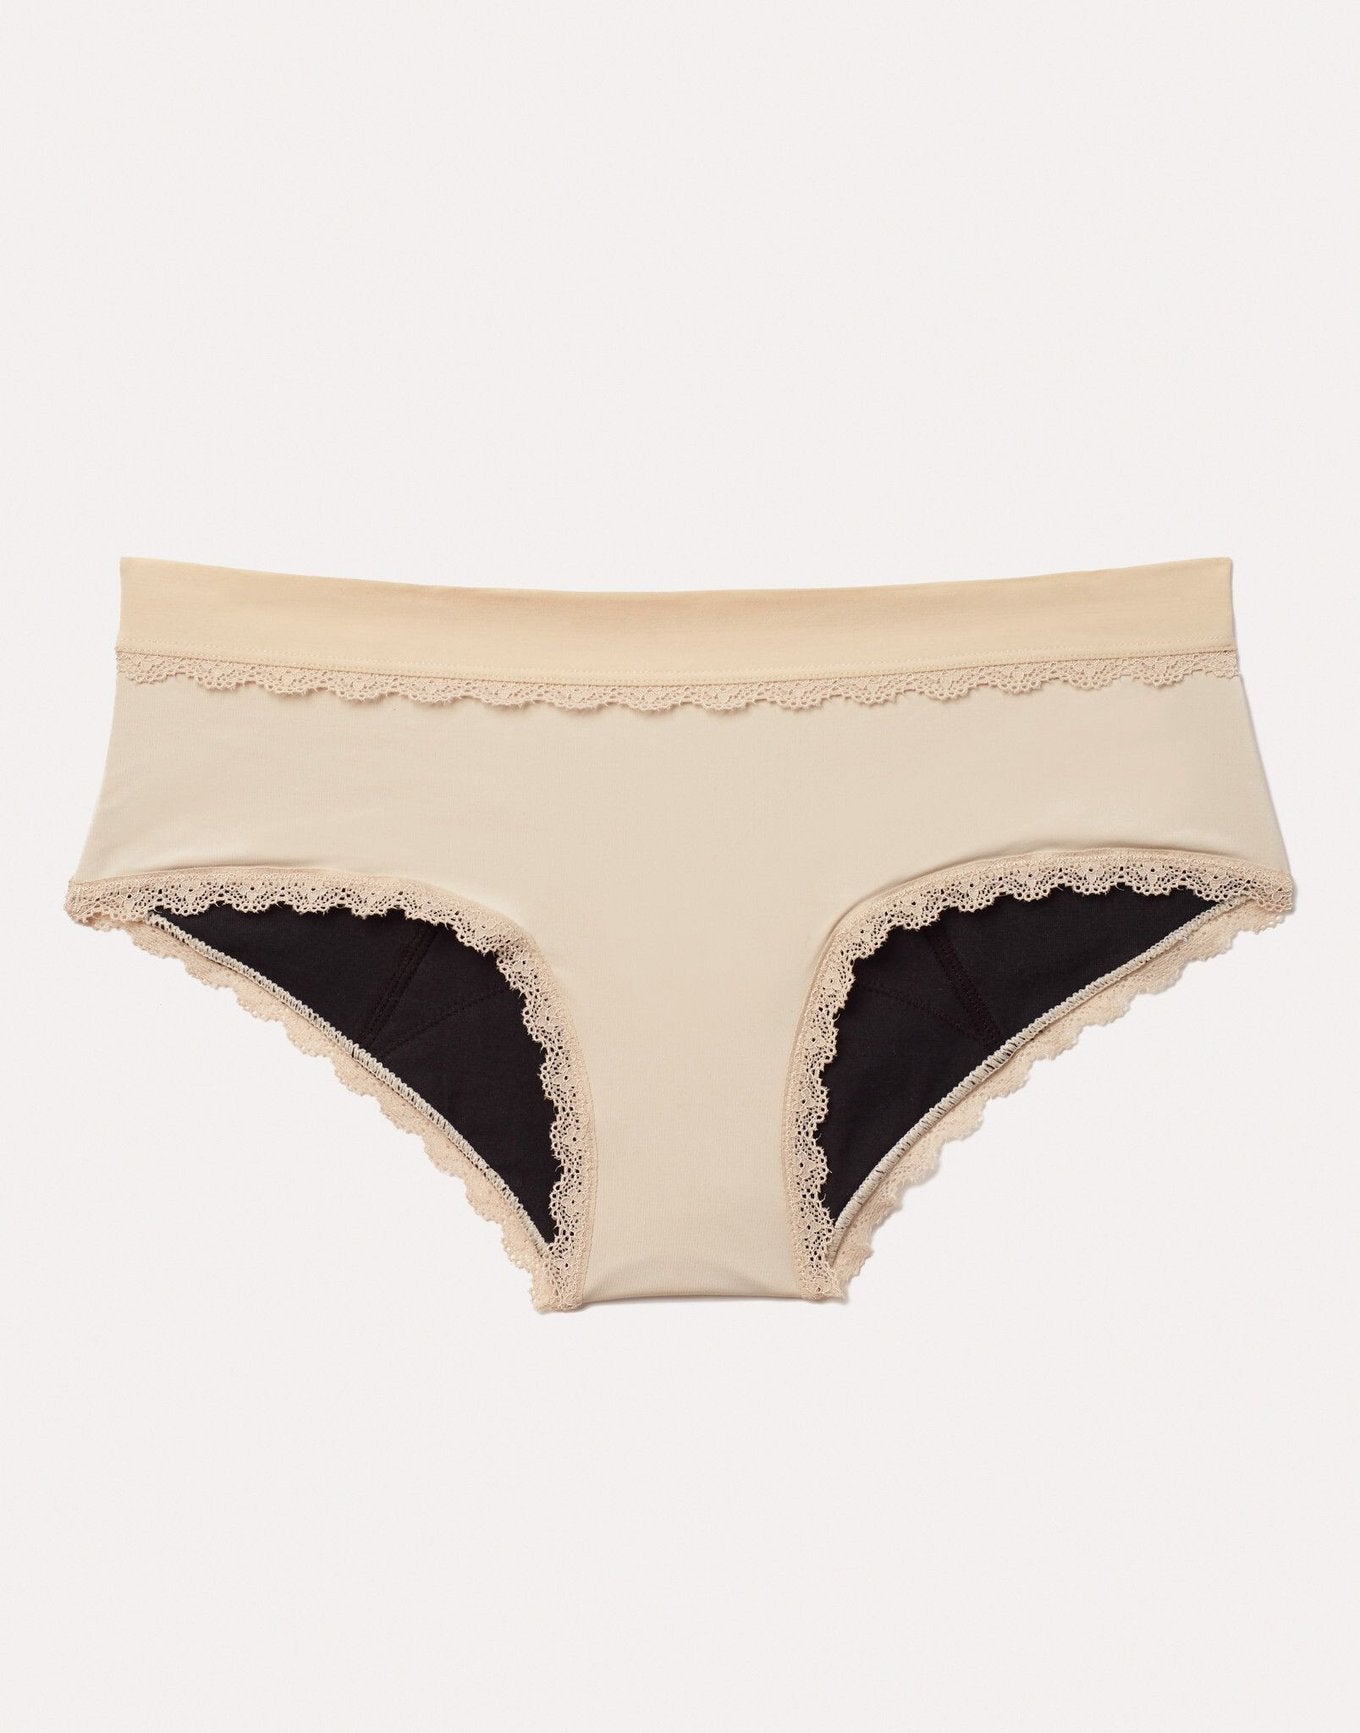 Joyja Olivia period-proof panty in color Strut The Street and shape hipster